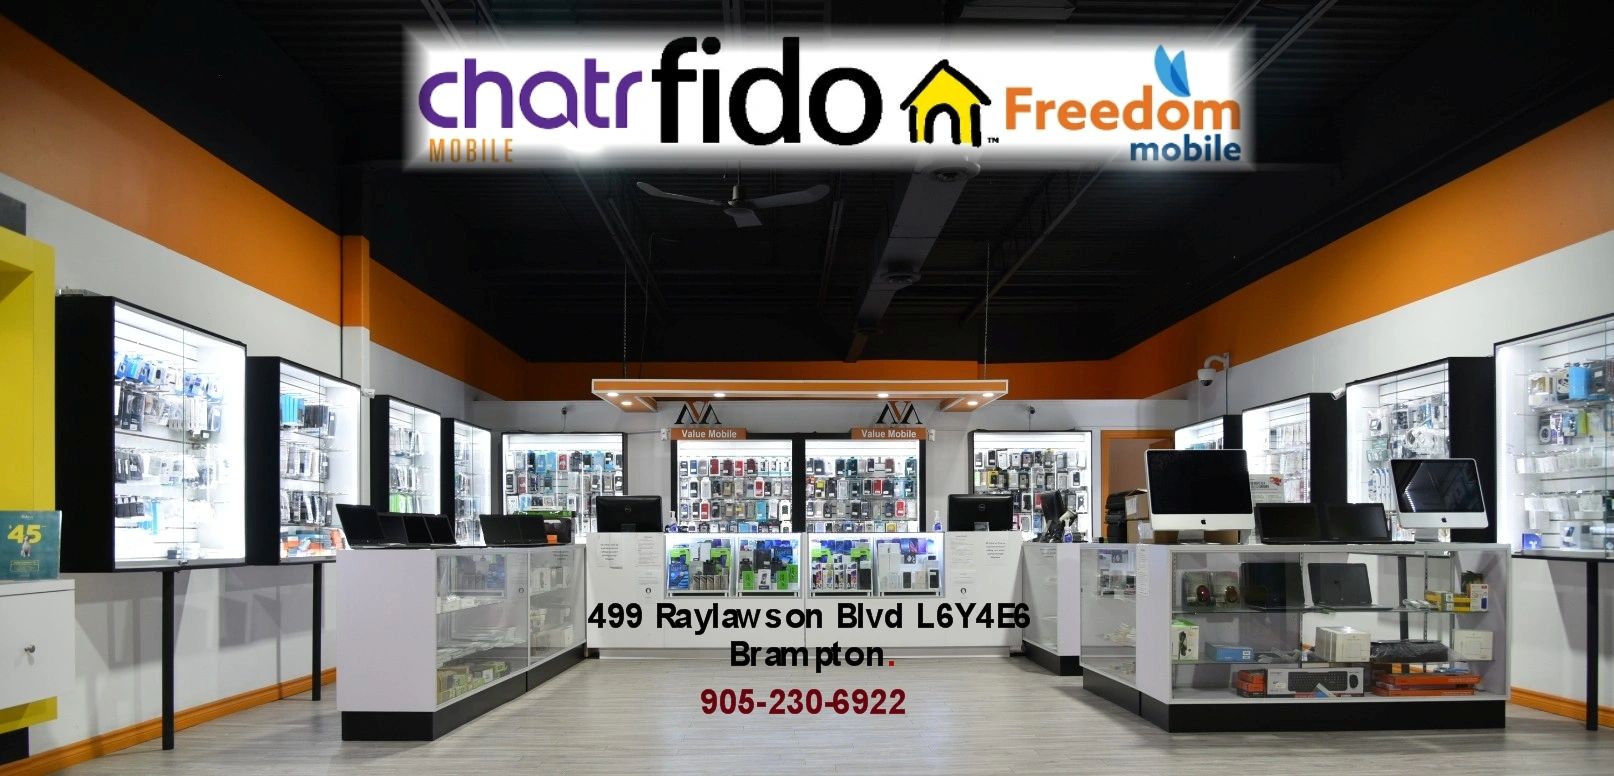 Chatr Fido Freedom value mobile 499 raylawson blvd iphone repair lcd replace computer laptop repair